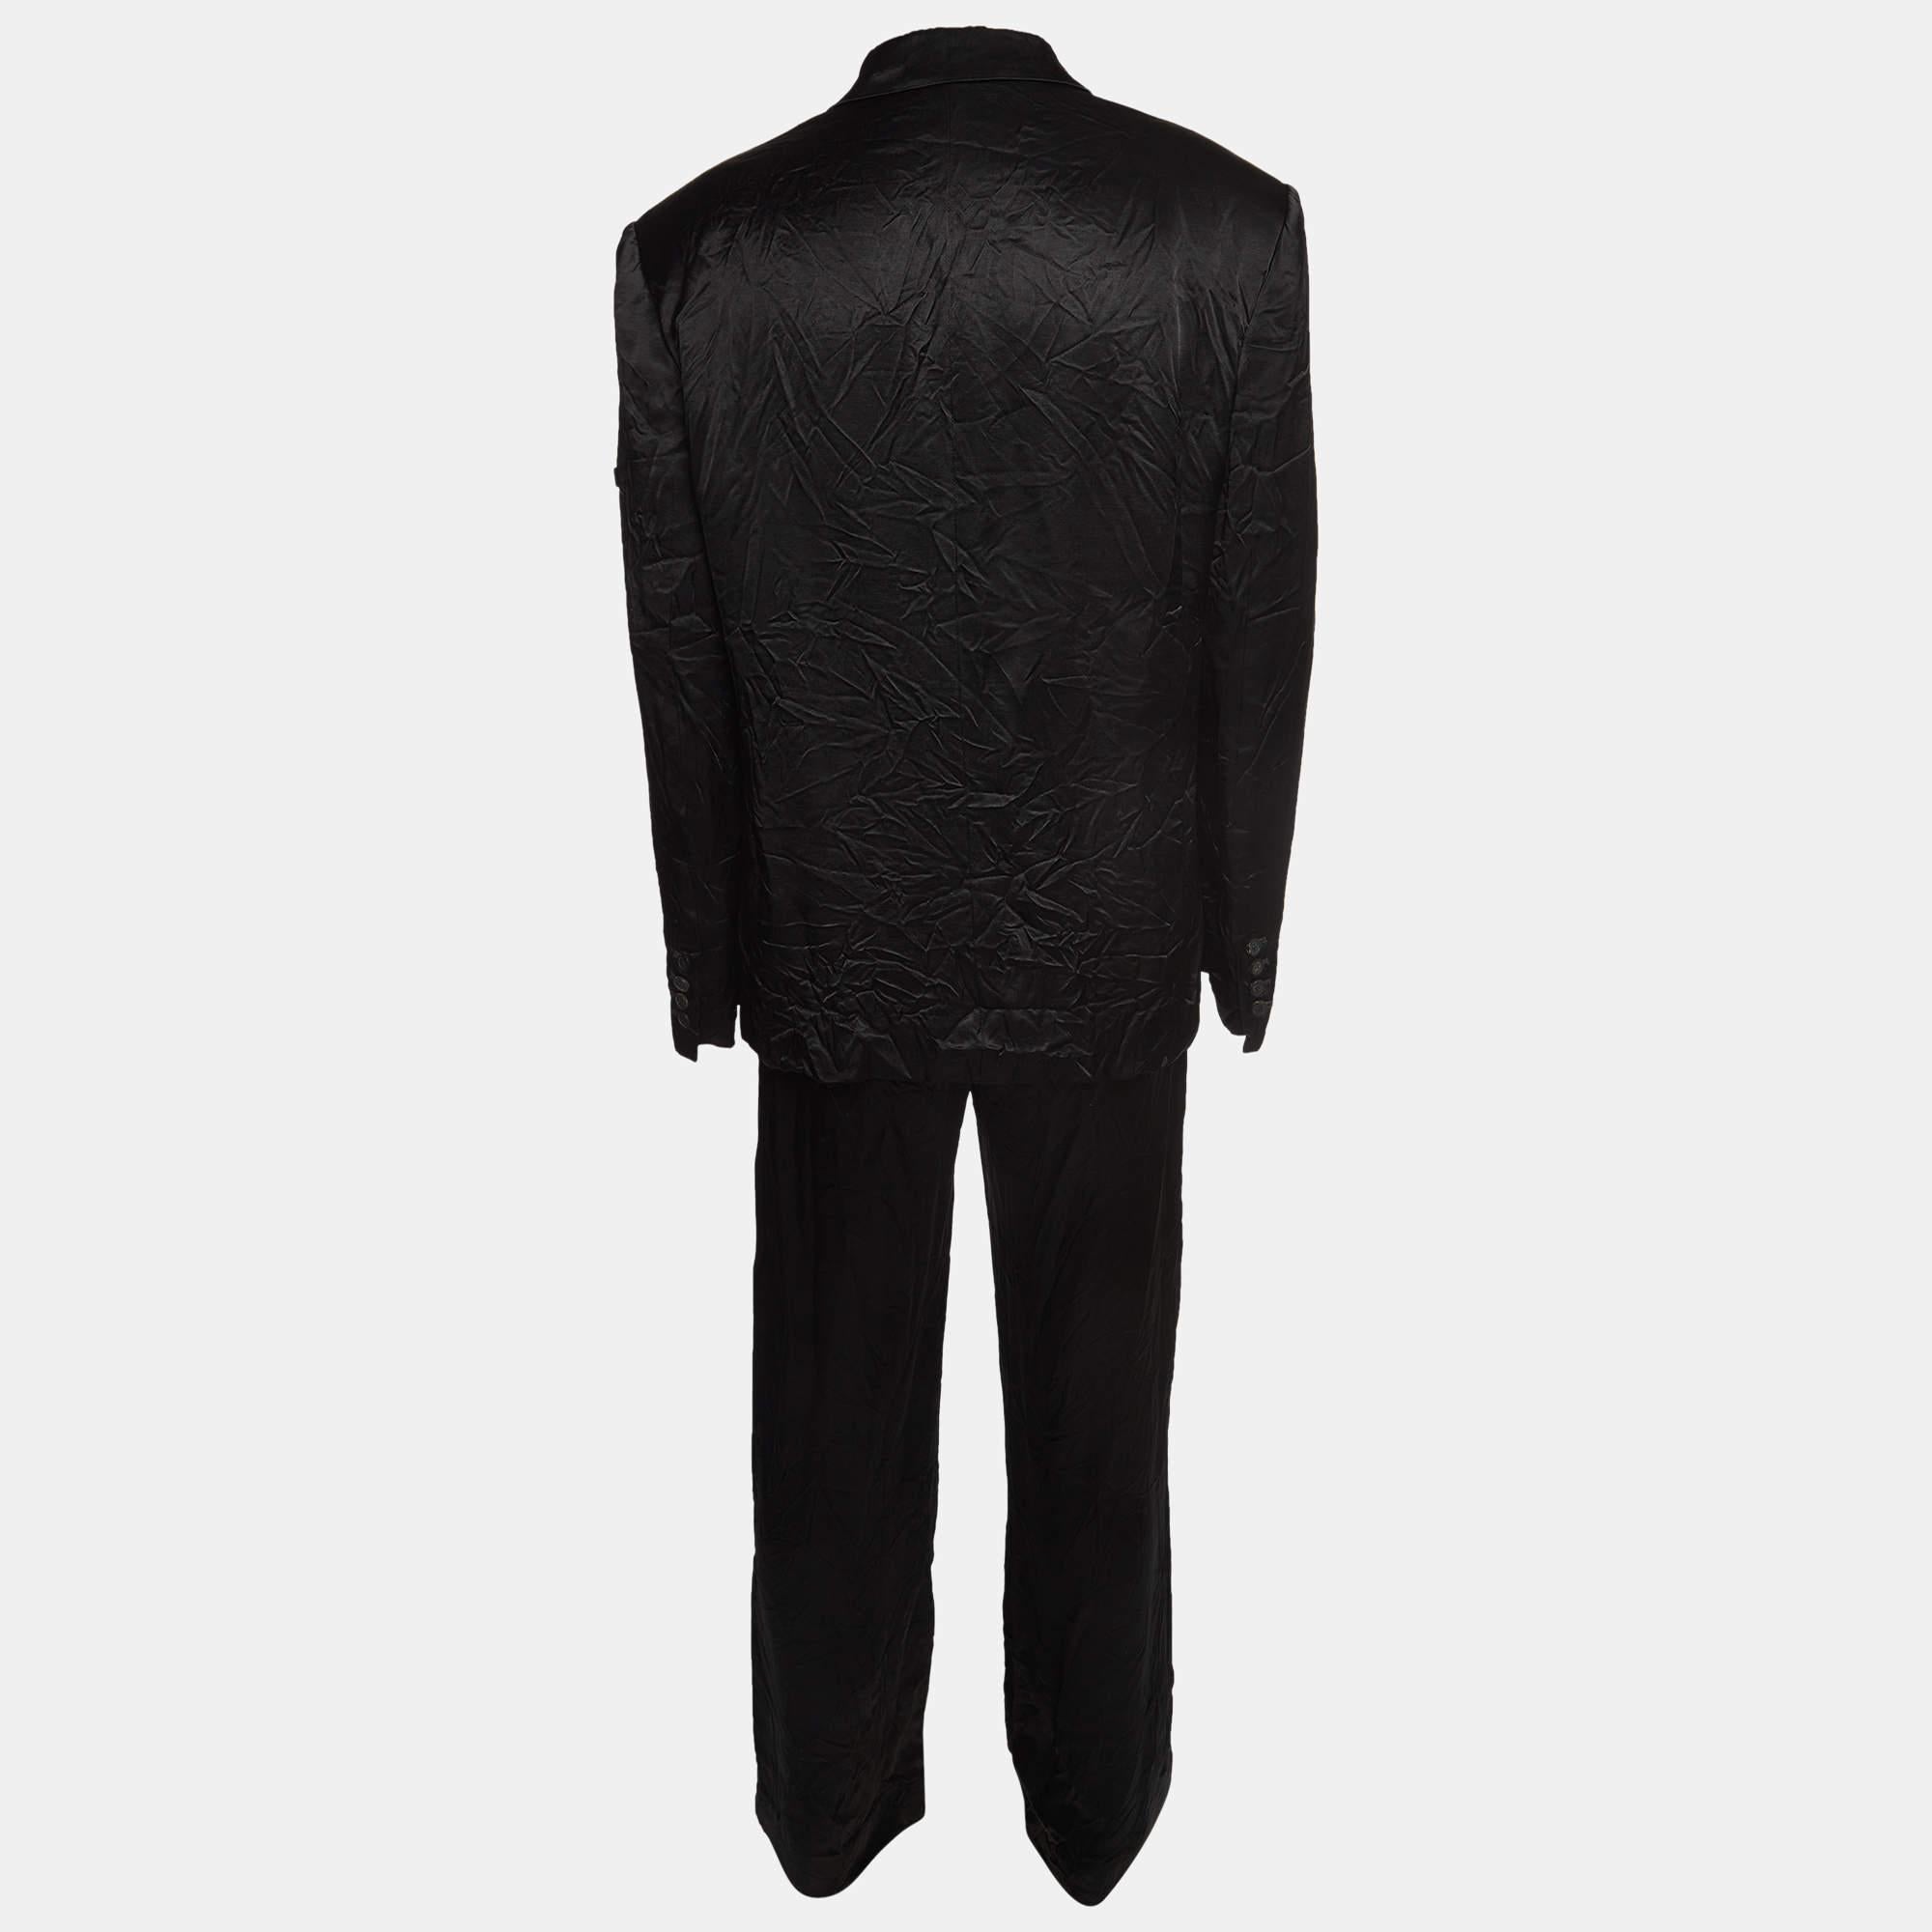 The Balenciaga suit exudes sophistication with its meticulously tailored design. Crafted from premium washed crepe, the sleek black ensemble features subtle logo appliques, elevating the classic suit into a modern, fashion-forward statement piece